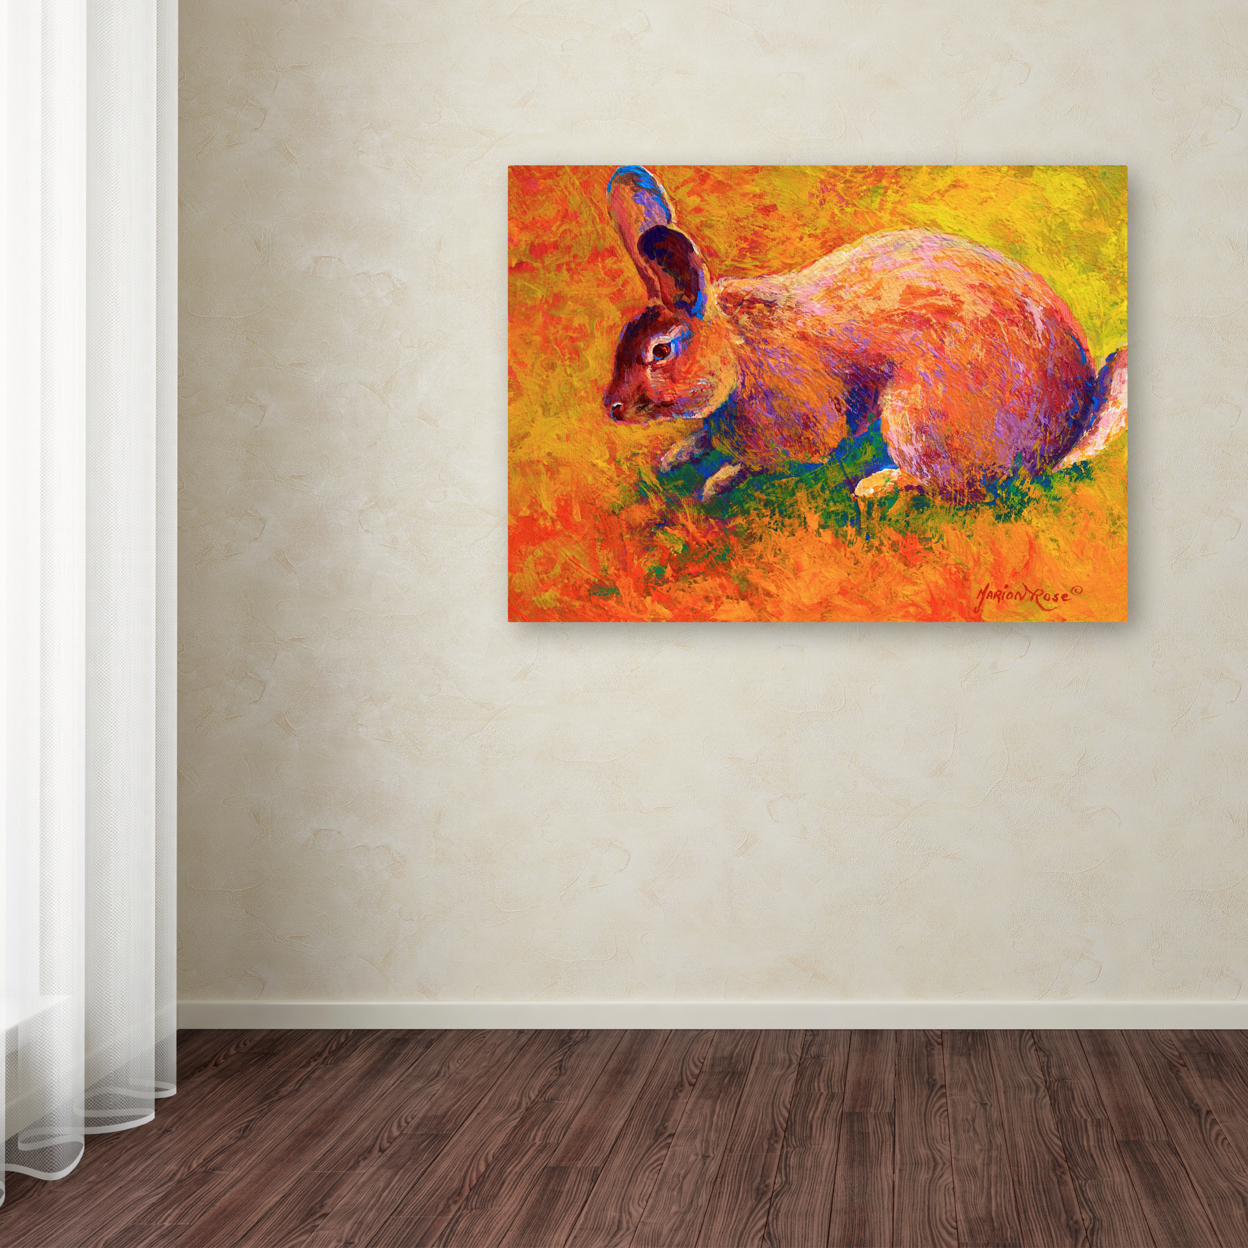 Marion Rose 'Rabbit 1' Ready To Hang Canvas Art 18 X 24 Inches Made In USA